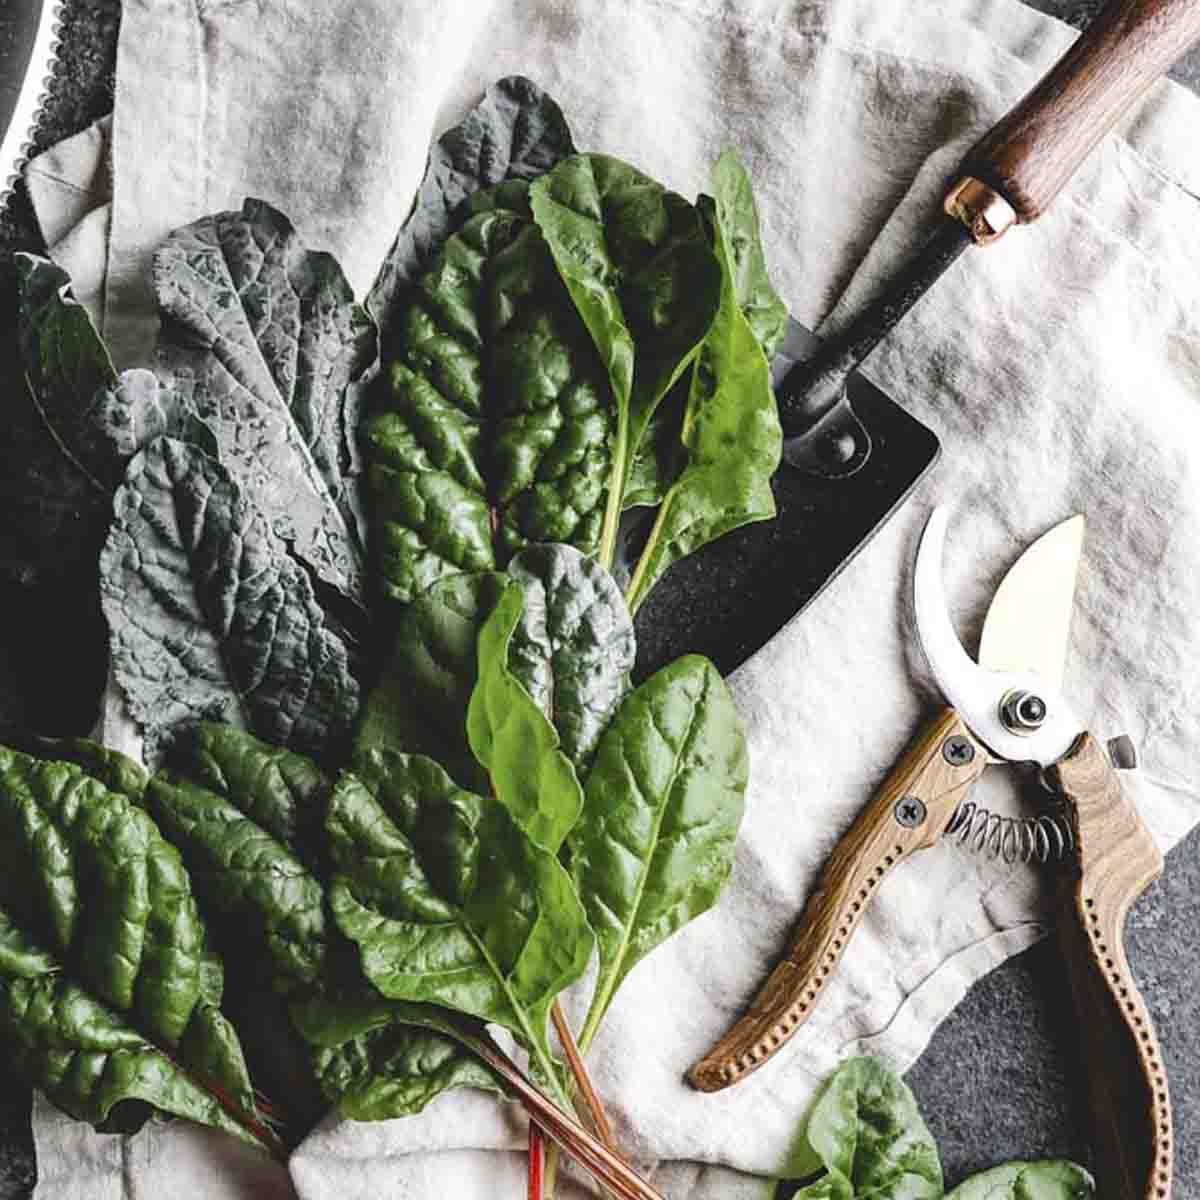 Array of garden tools with freshly cut spinach.